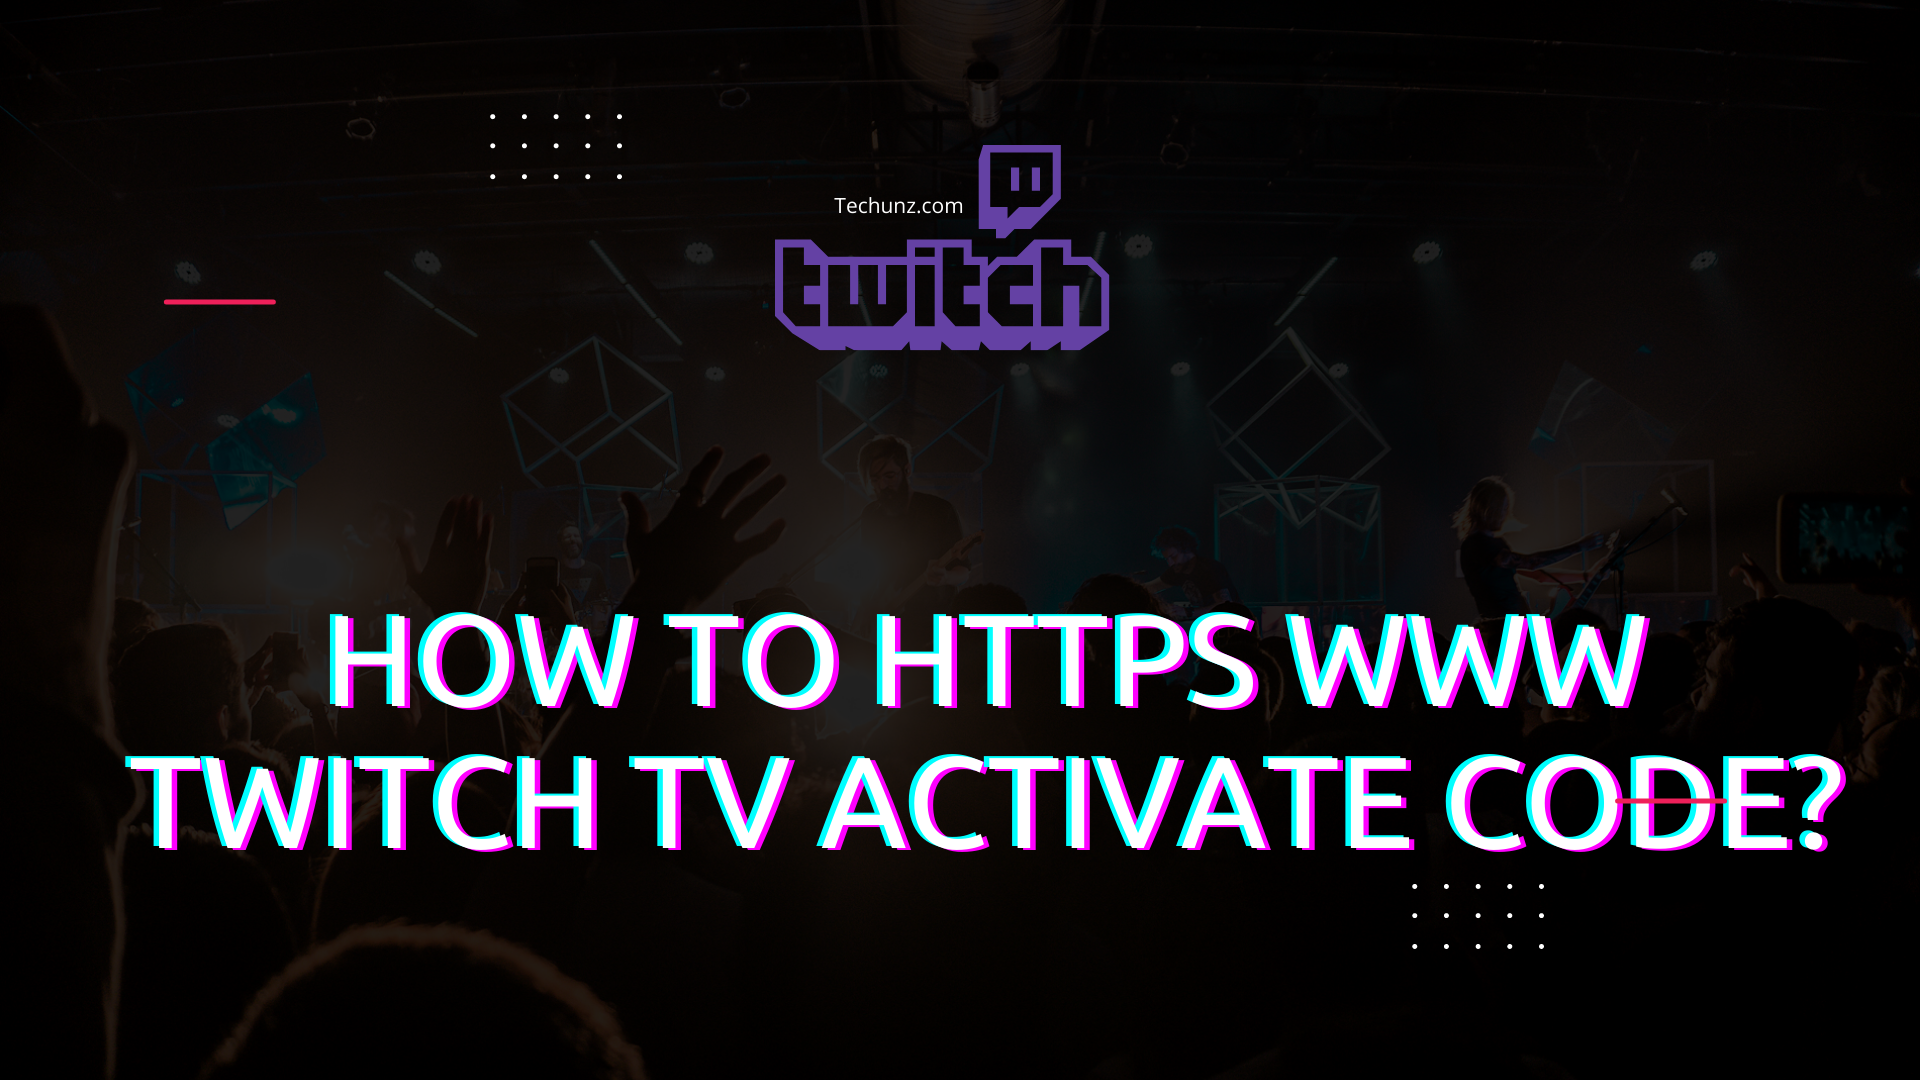 To Activate https www twitch tv activate code On Playstation